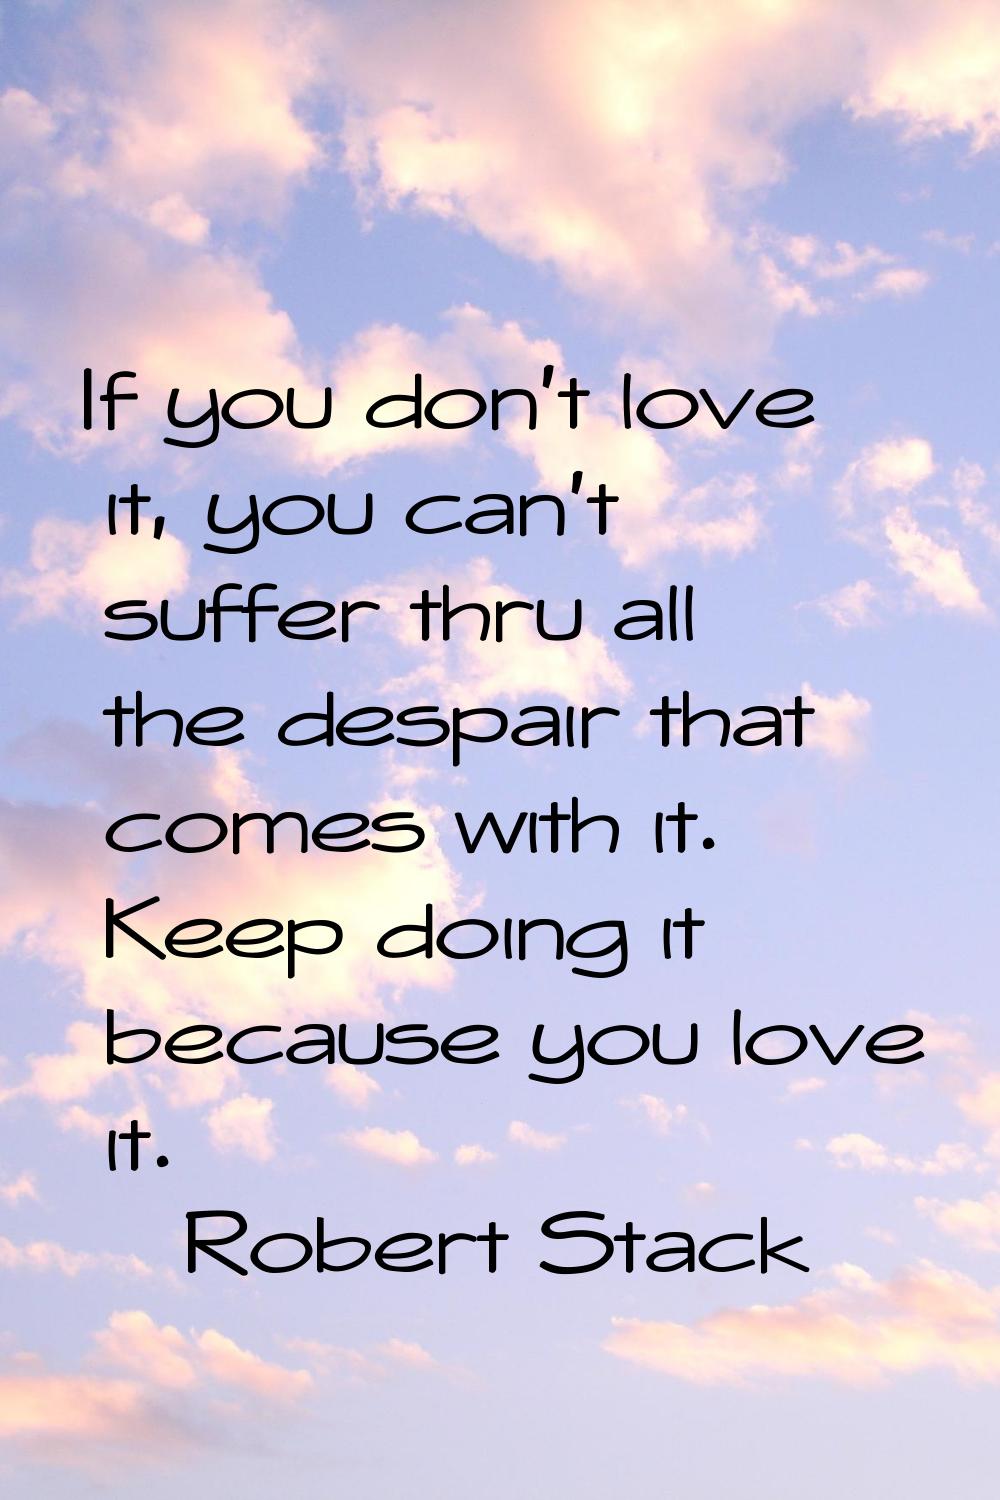 If you don't love it, you can't suffer thru all the despair that comes with it. Keep doing it becau